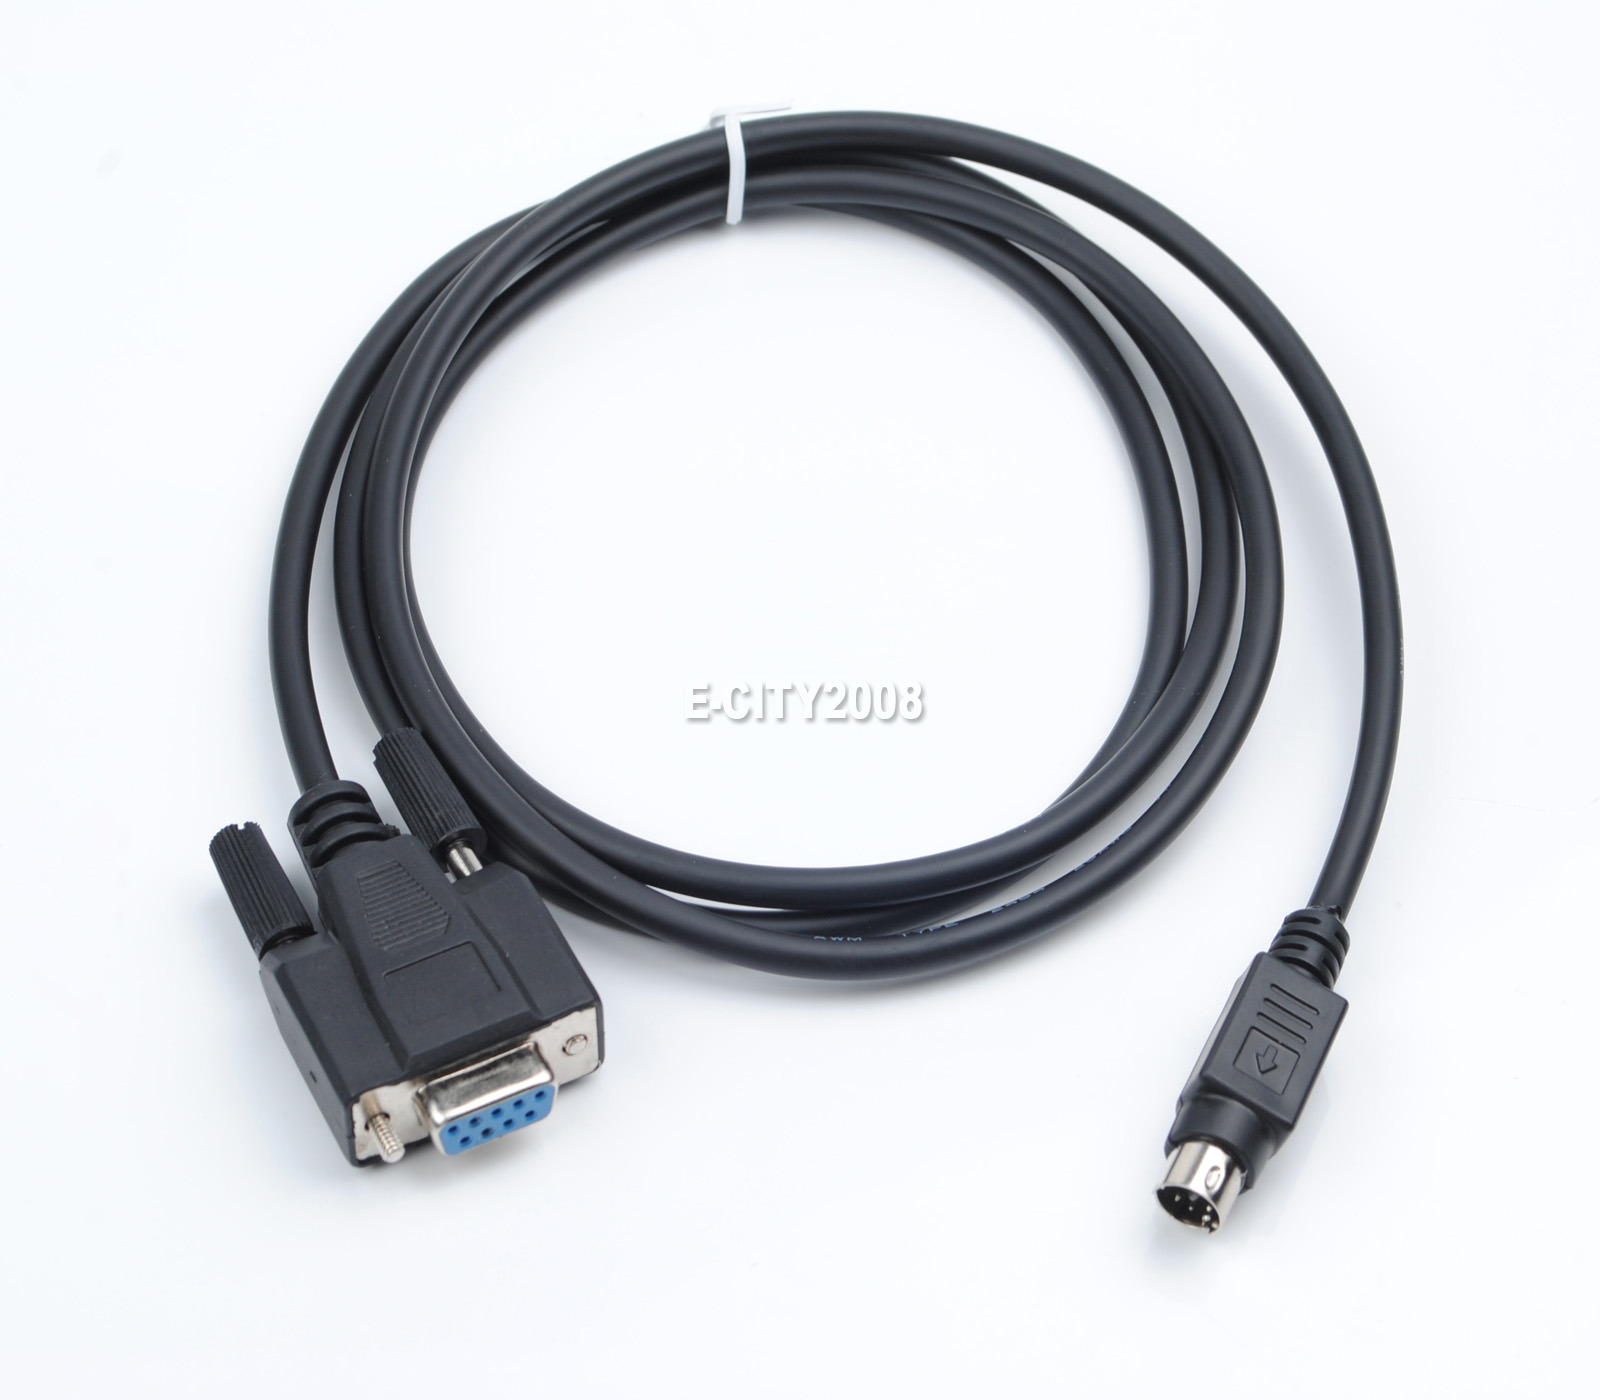 New Fit For Dell Password Reset/Service Cable MN657 MD1200 MD3200 USA Seller